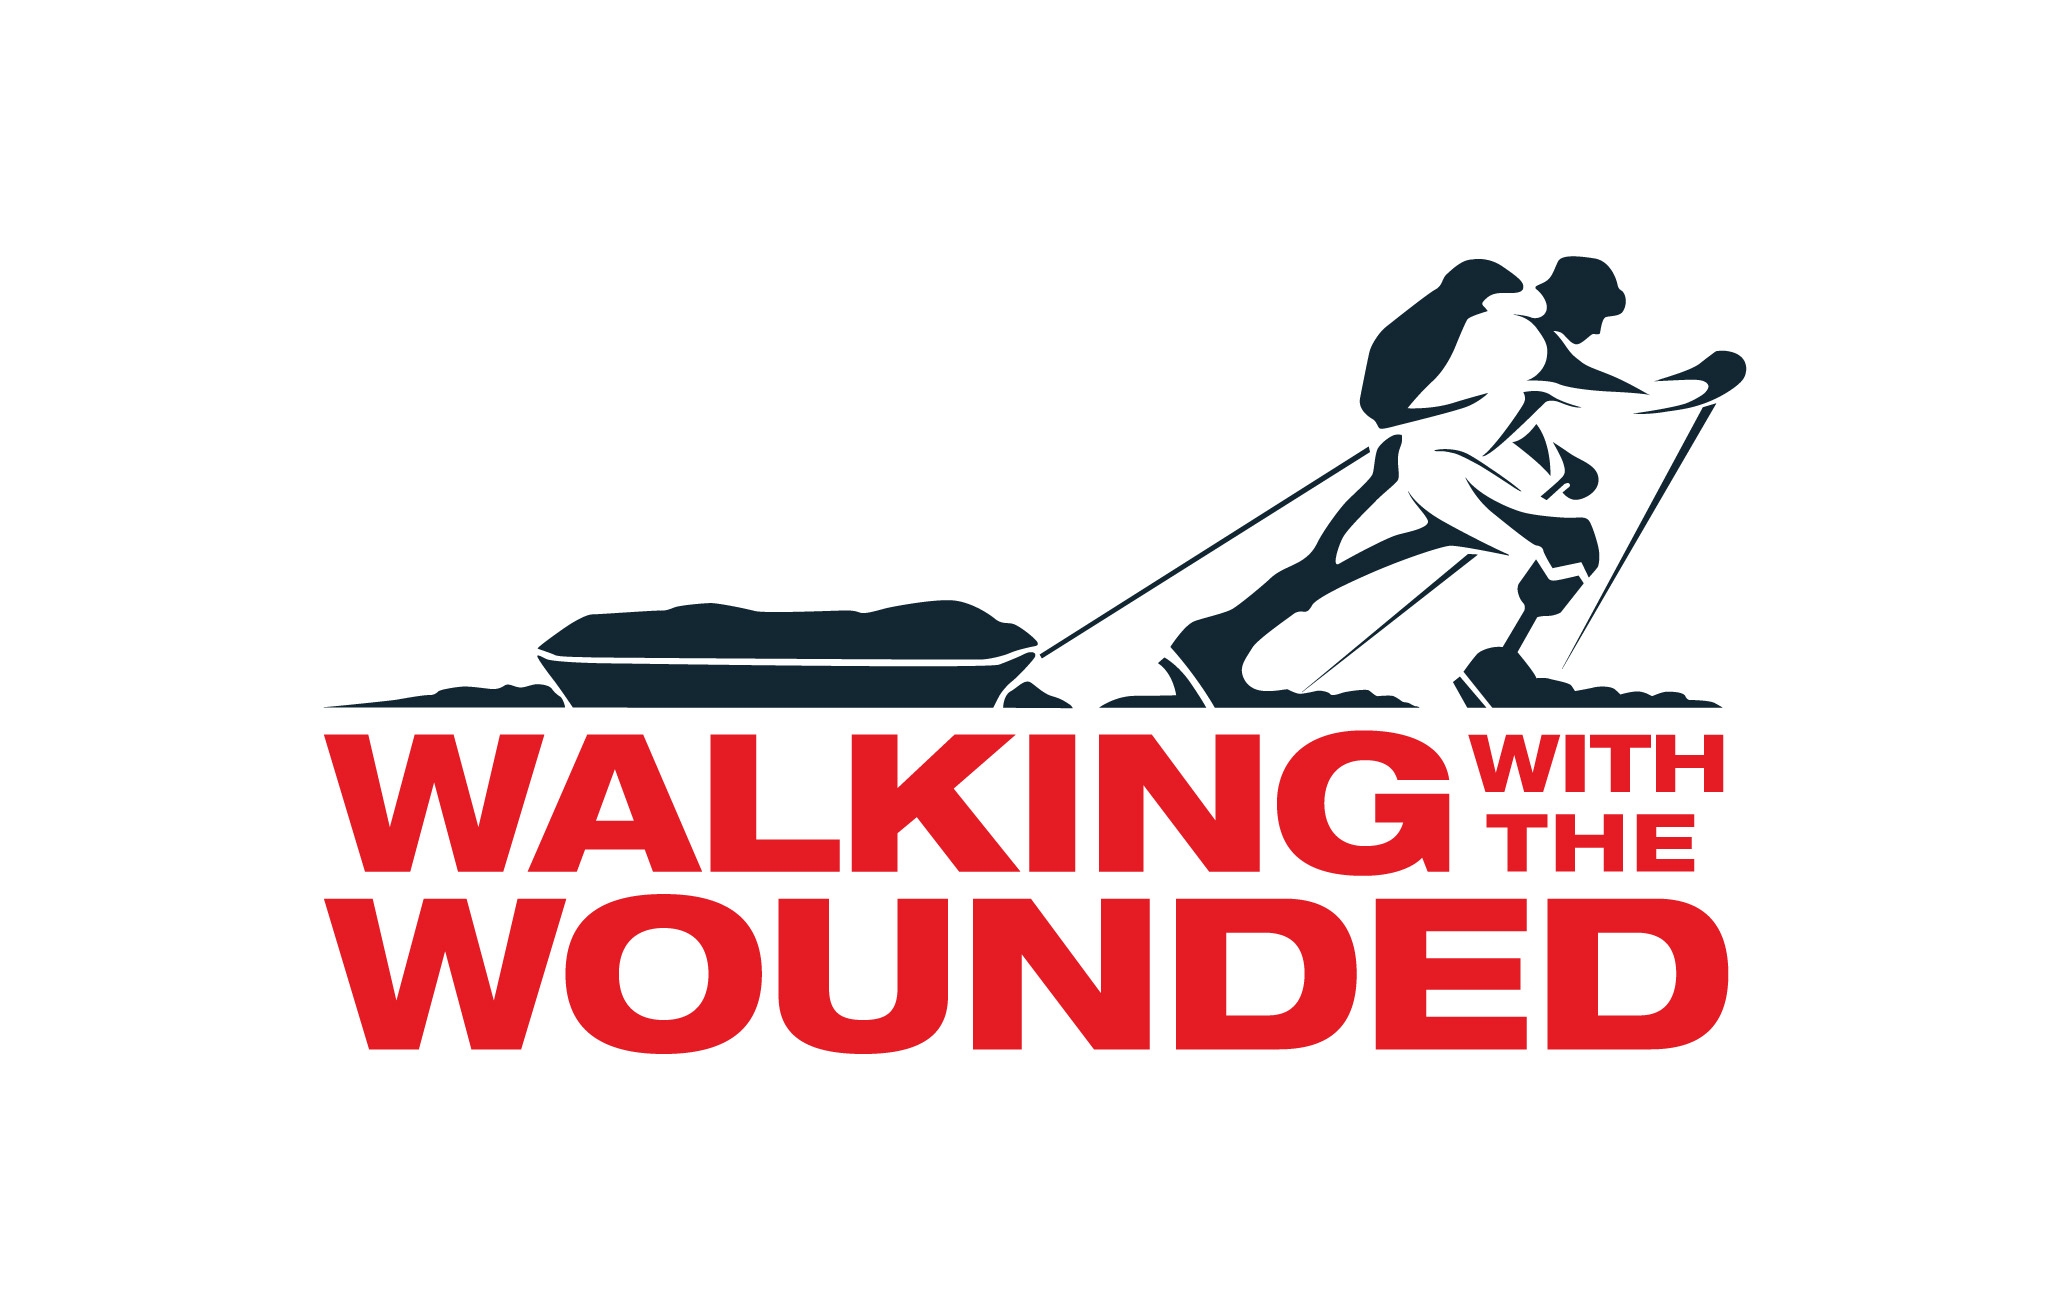 Walking-With-the-Wounded1.jpg